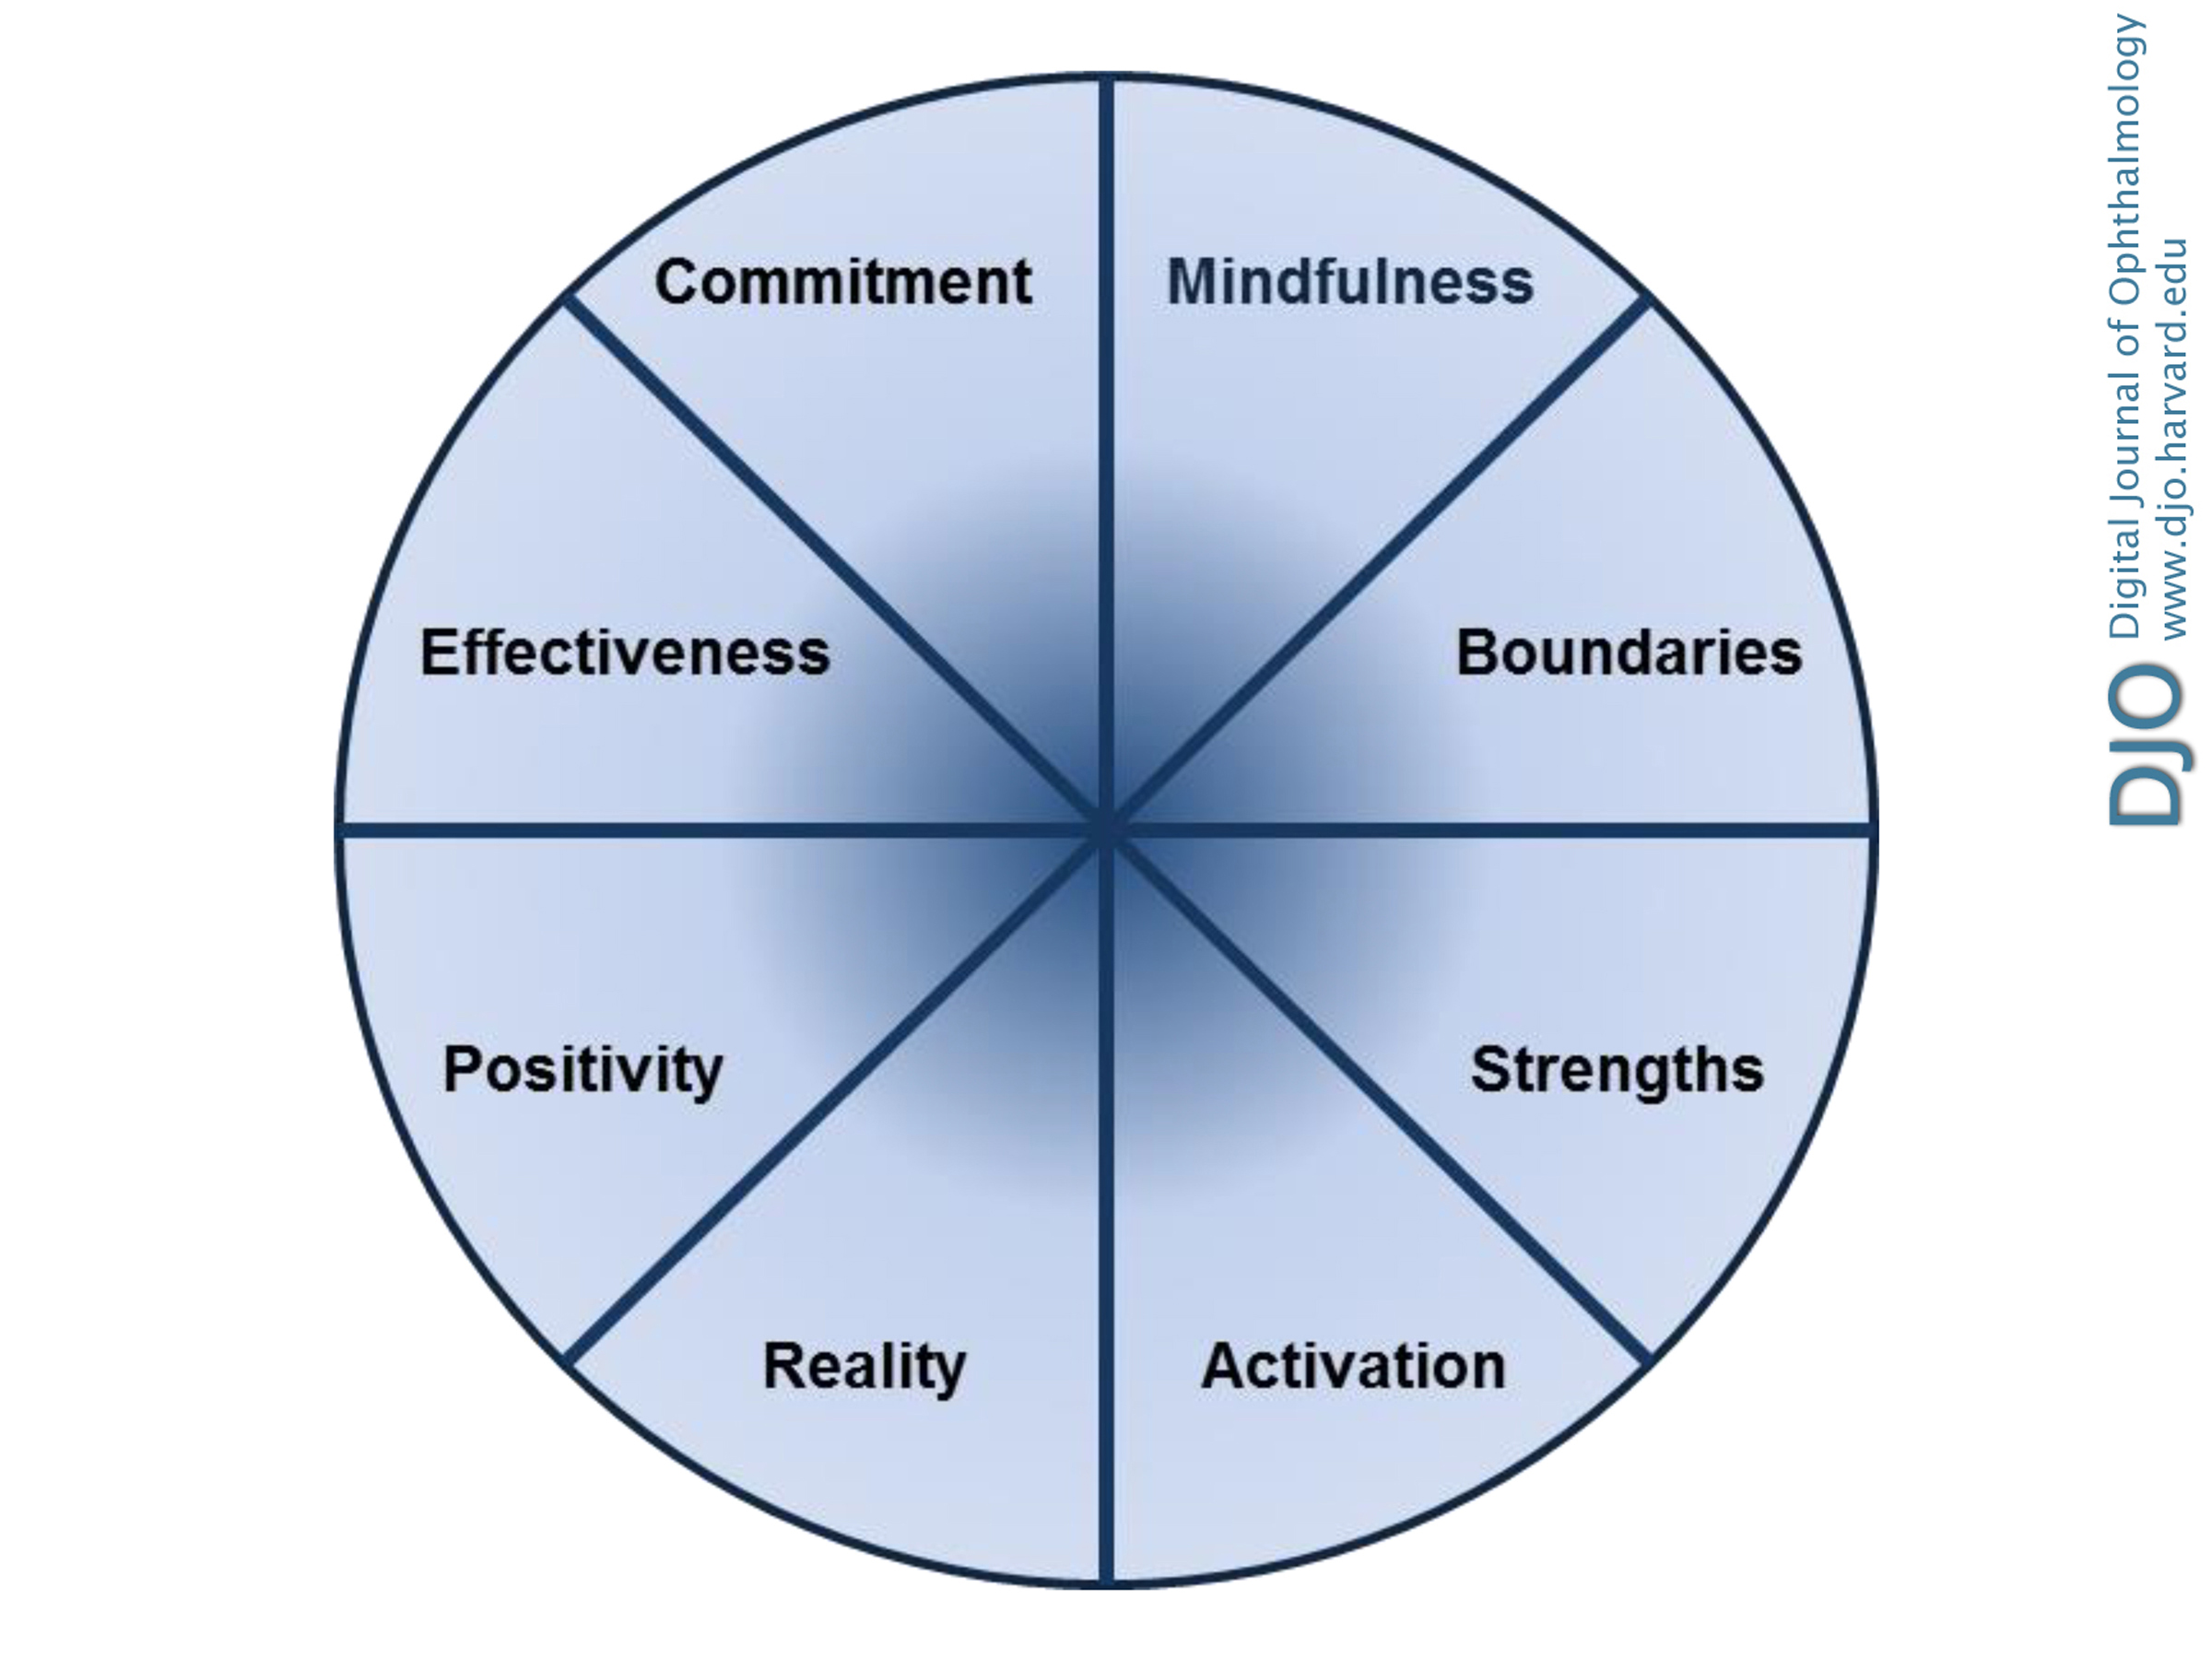 Wheel of skills for physician well-being